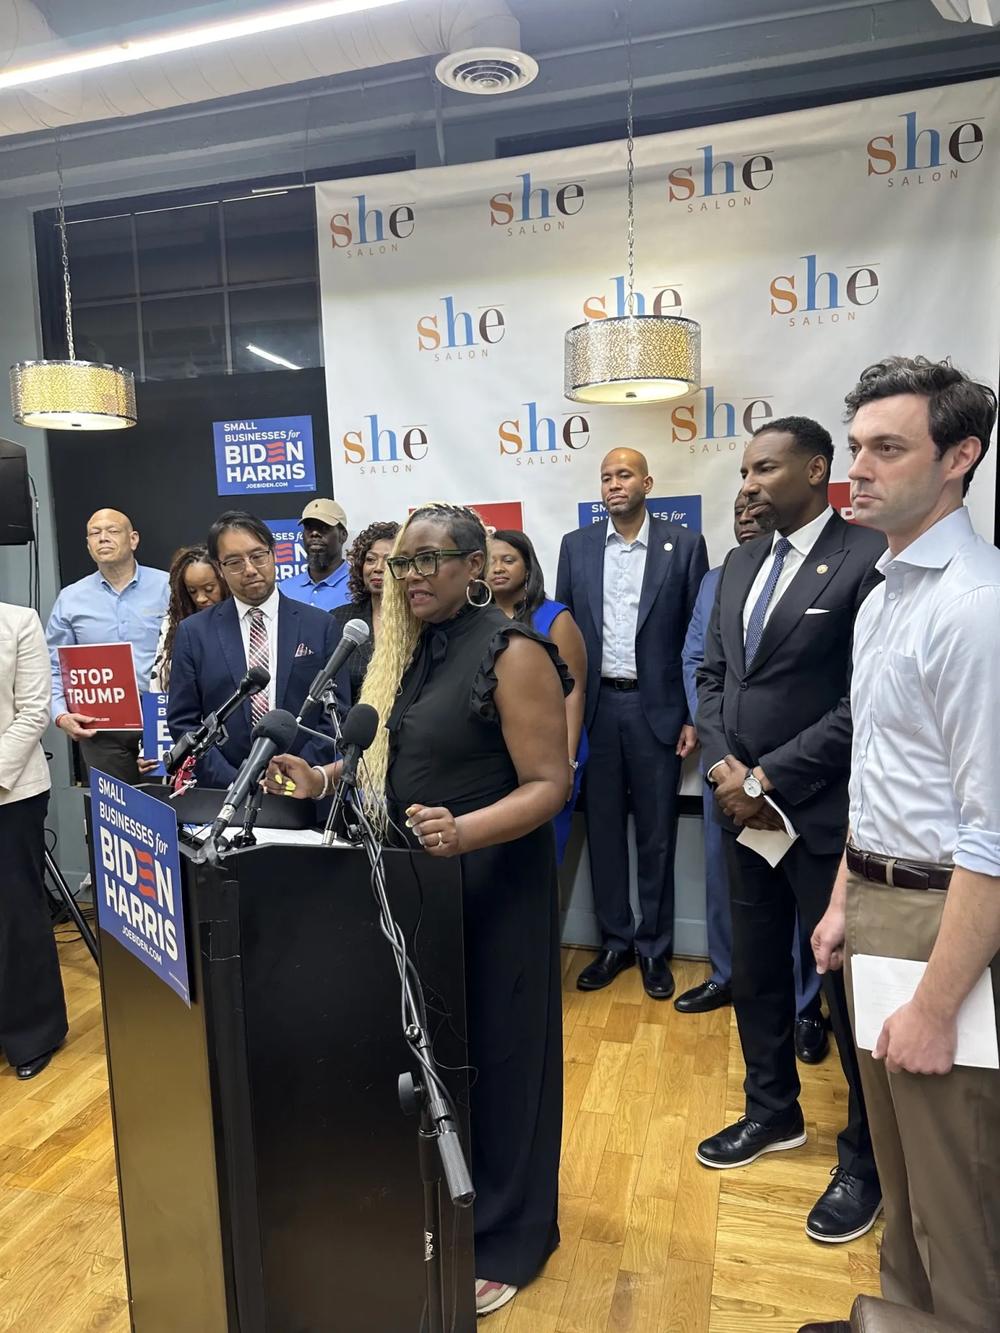 Gina Palmer, owner of She Salon, is flanked by Senator Jon Ossoff (right) and Atlanta Mayor Andre Dickens, spoke of having to watch many of her friends close their small businesses during the Trump administration. “I have seen my friends close their businesses because they were struggling to get by,” Palmer said. “Because of the Biden-Harris administration we are making a comeback.” Photo by Donnell Suggs/The Atlanta Voice